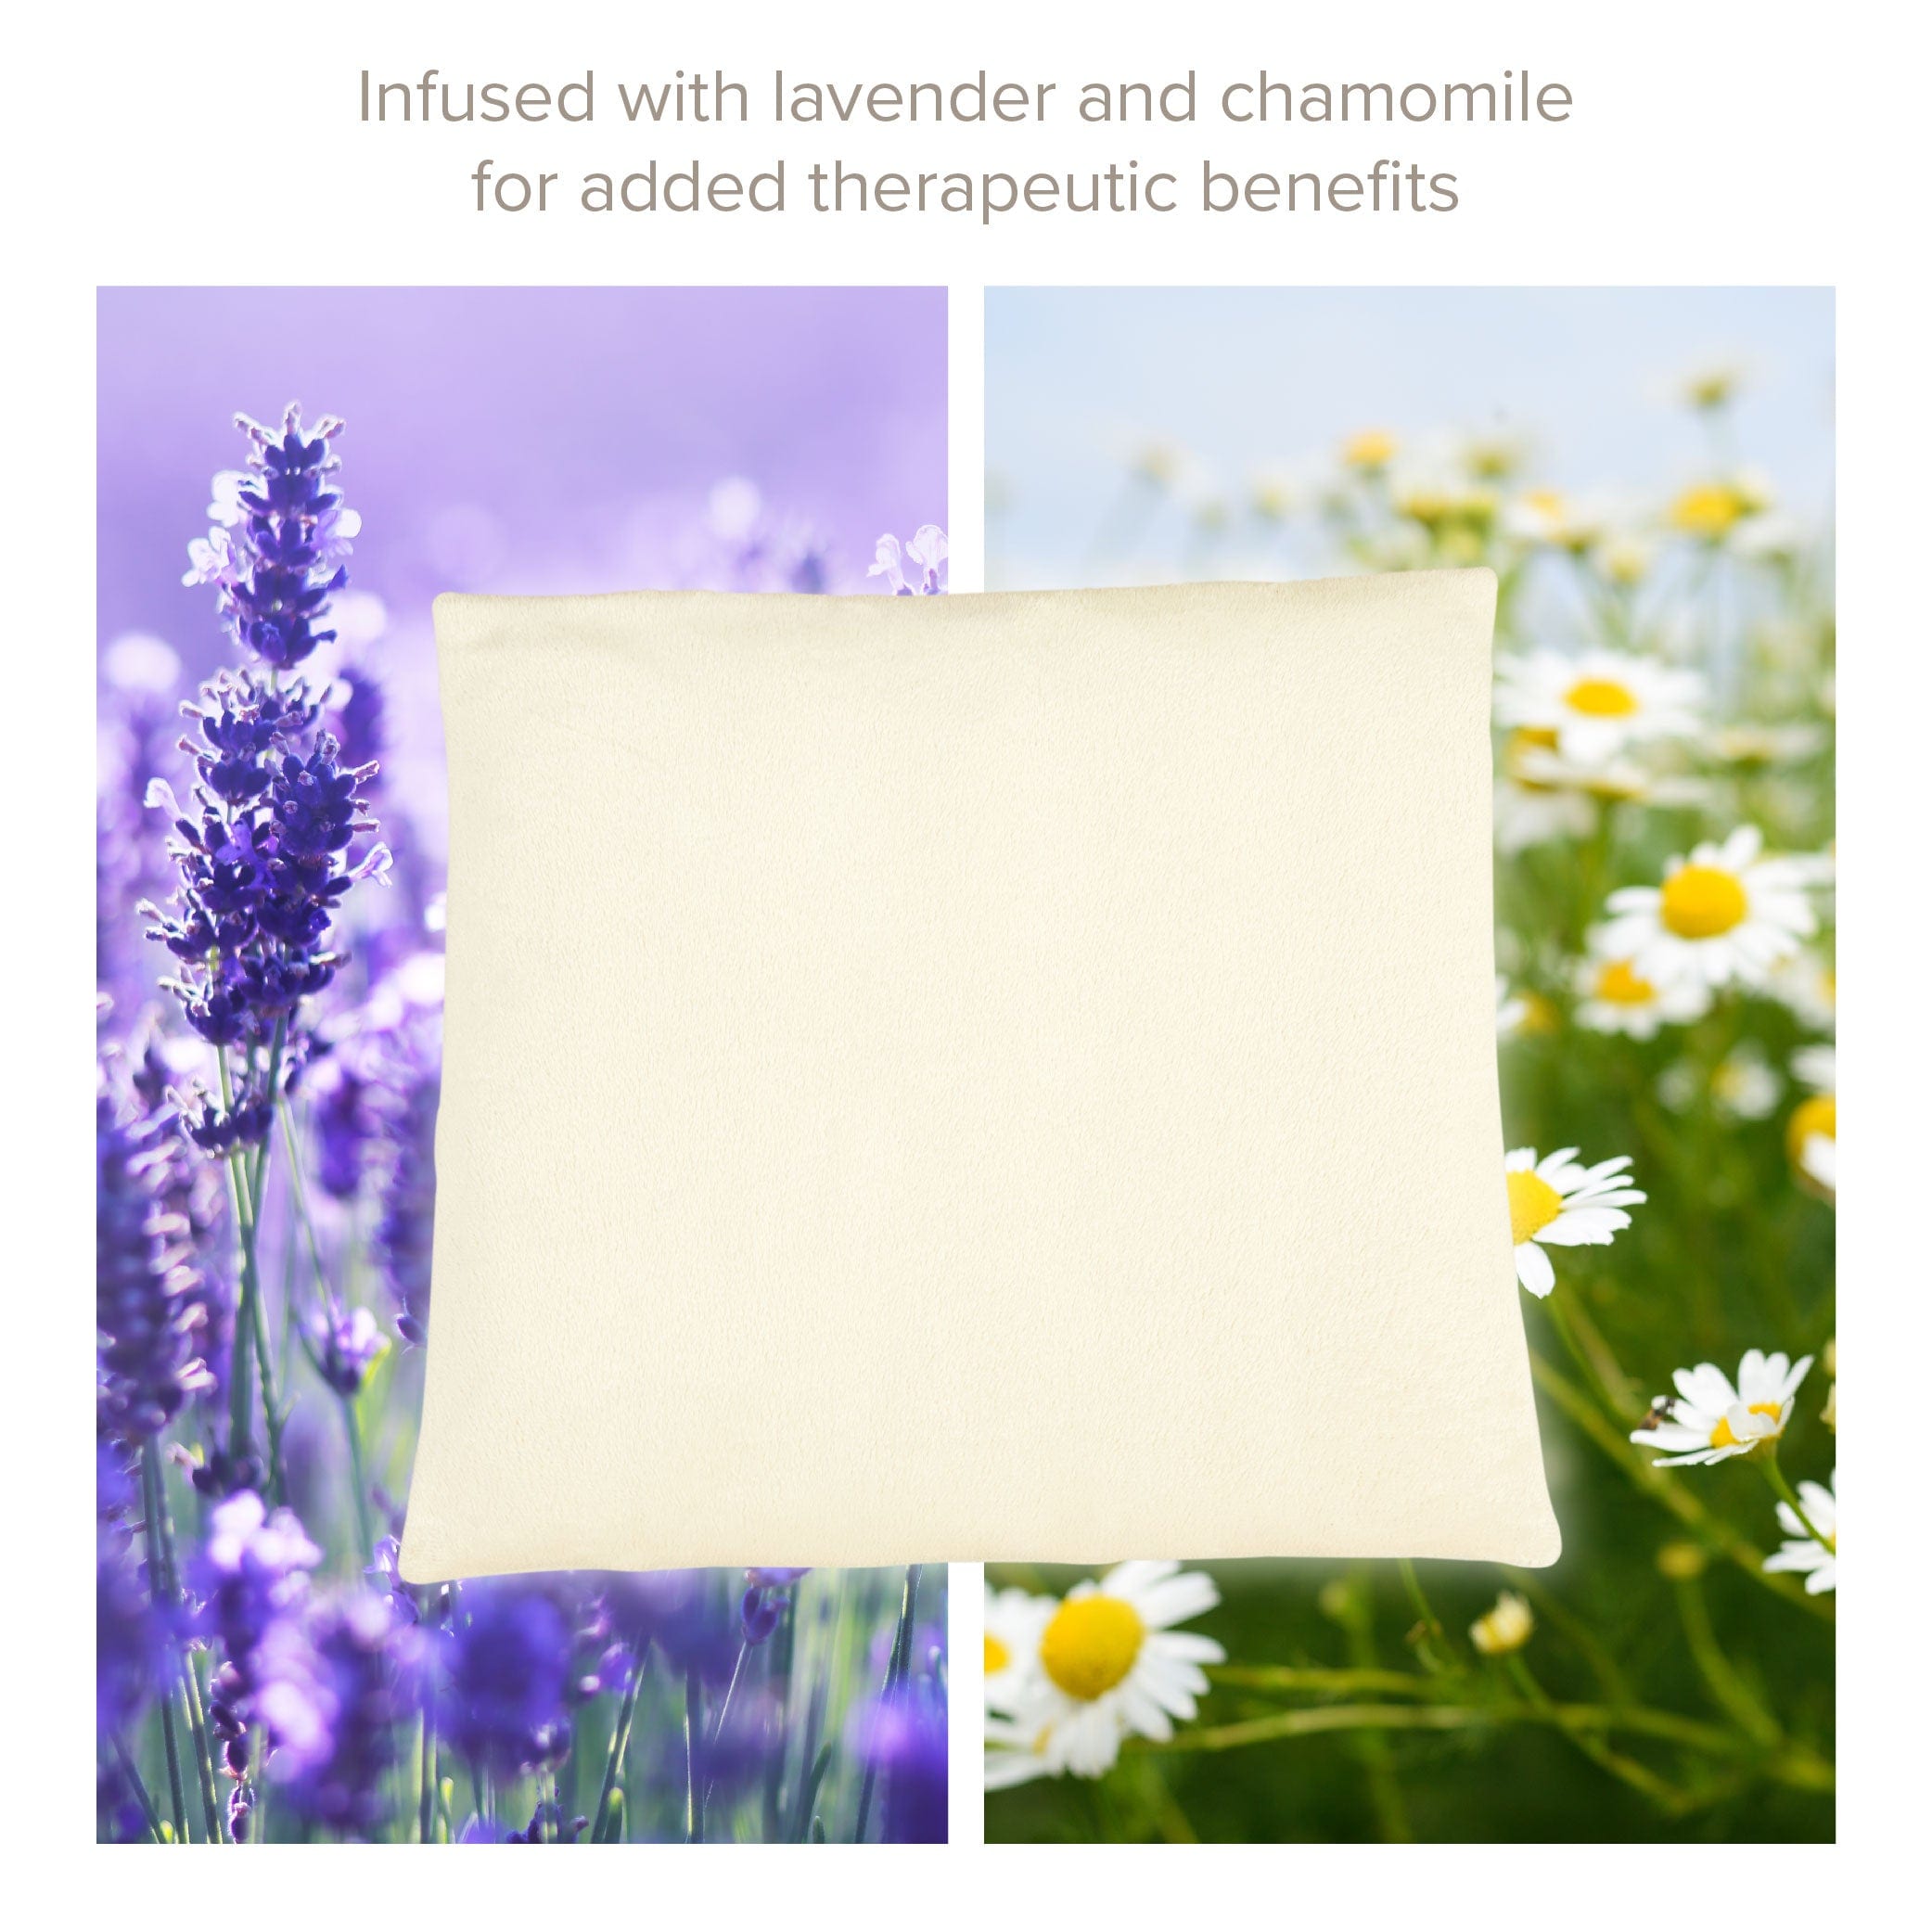 Bed Buddy Comfort Pack - Infused with lavender and chamomile for added therapeutic benefits